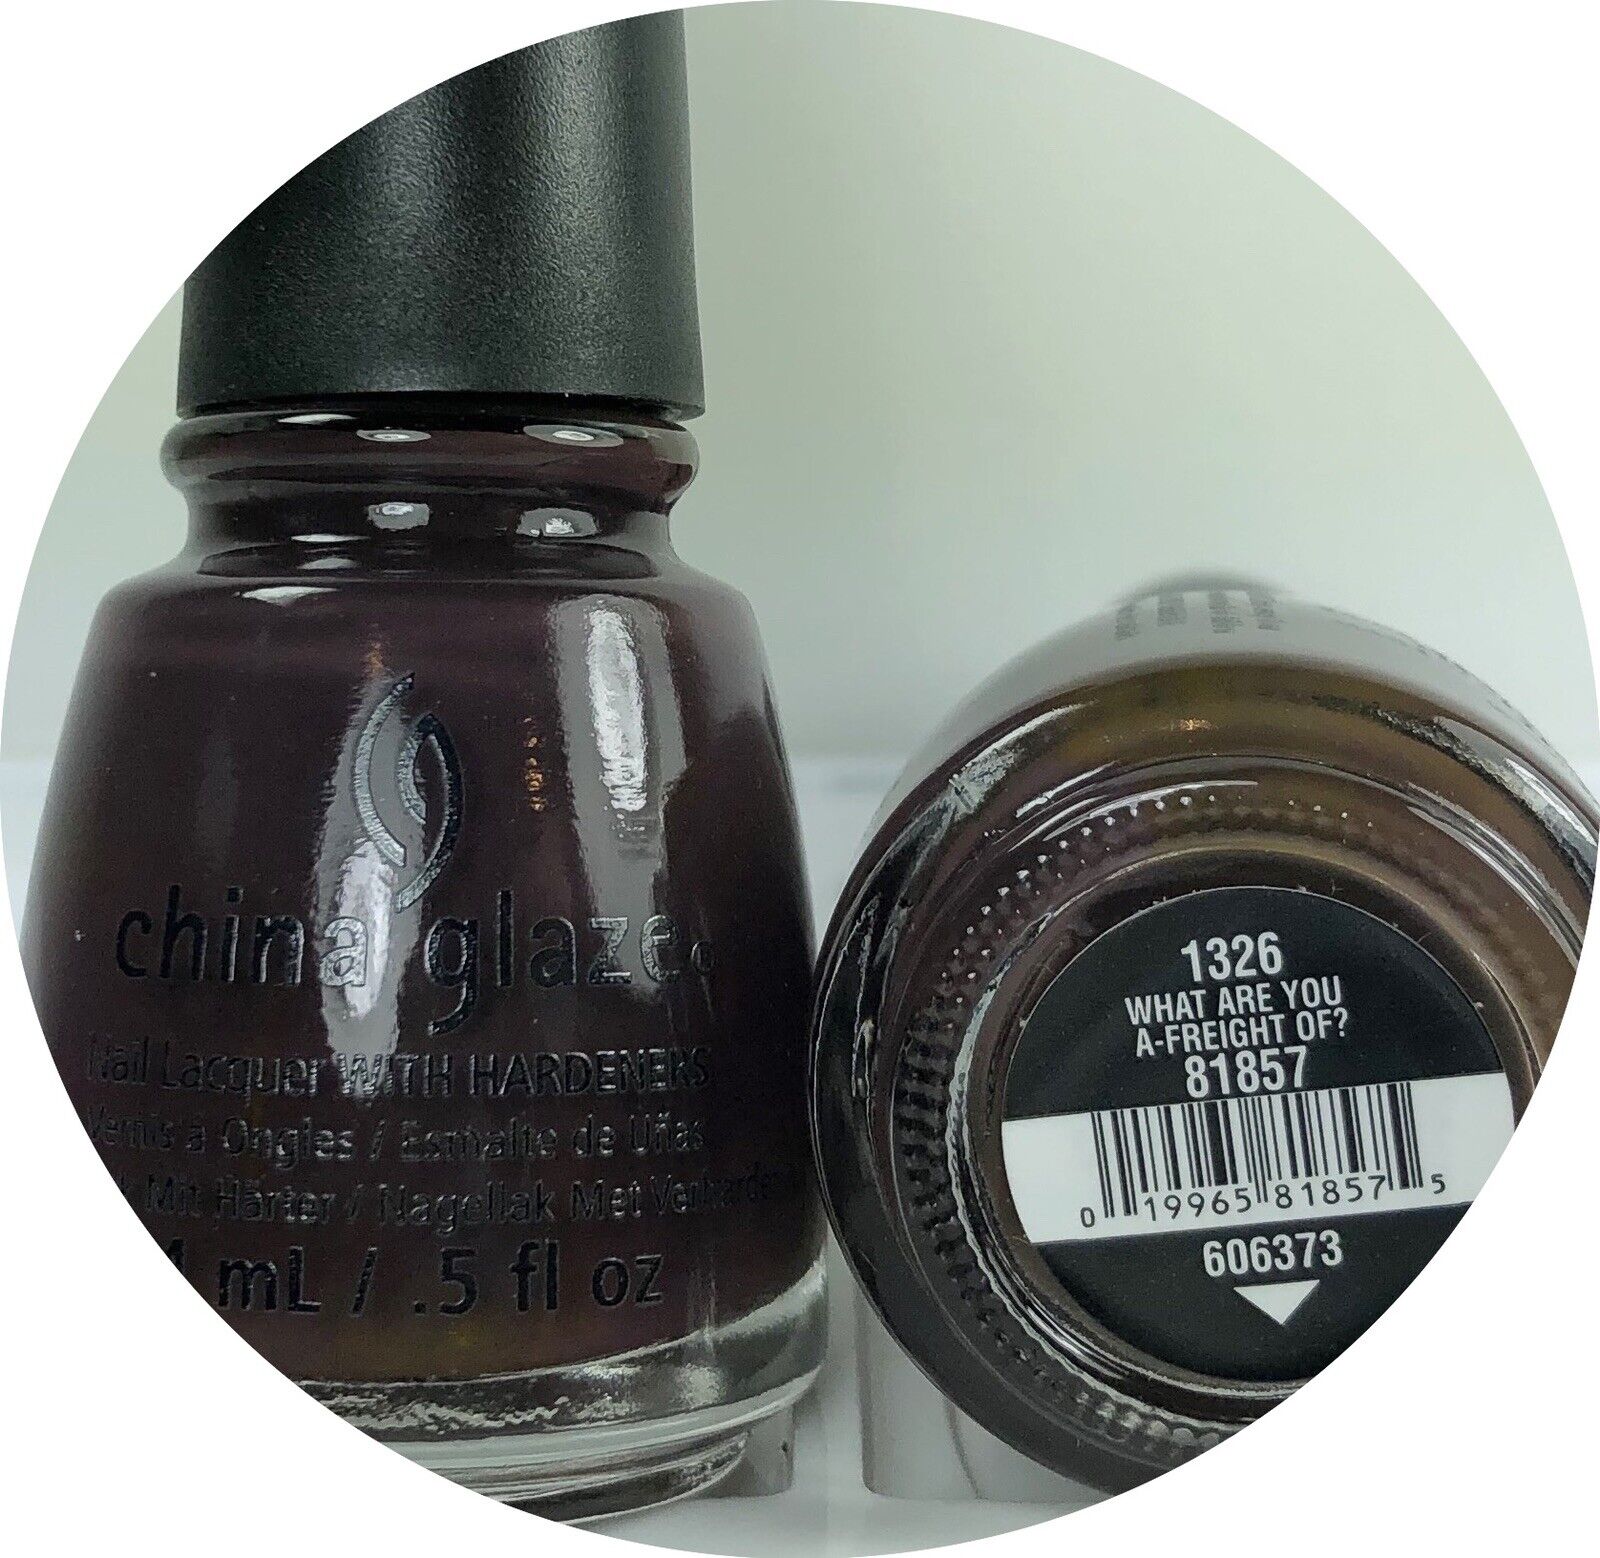 China Glaze Nail Polish What Are You A Freight Of? 1326 Dark Cherry Chocolate Cr